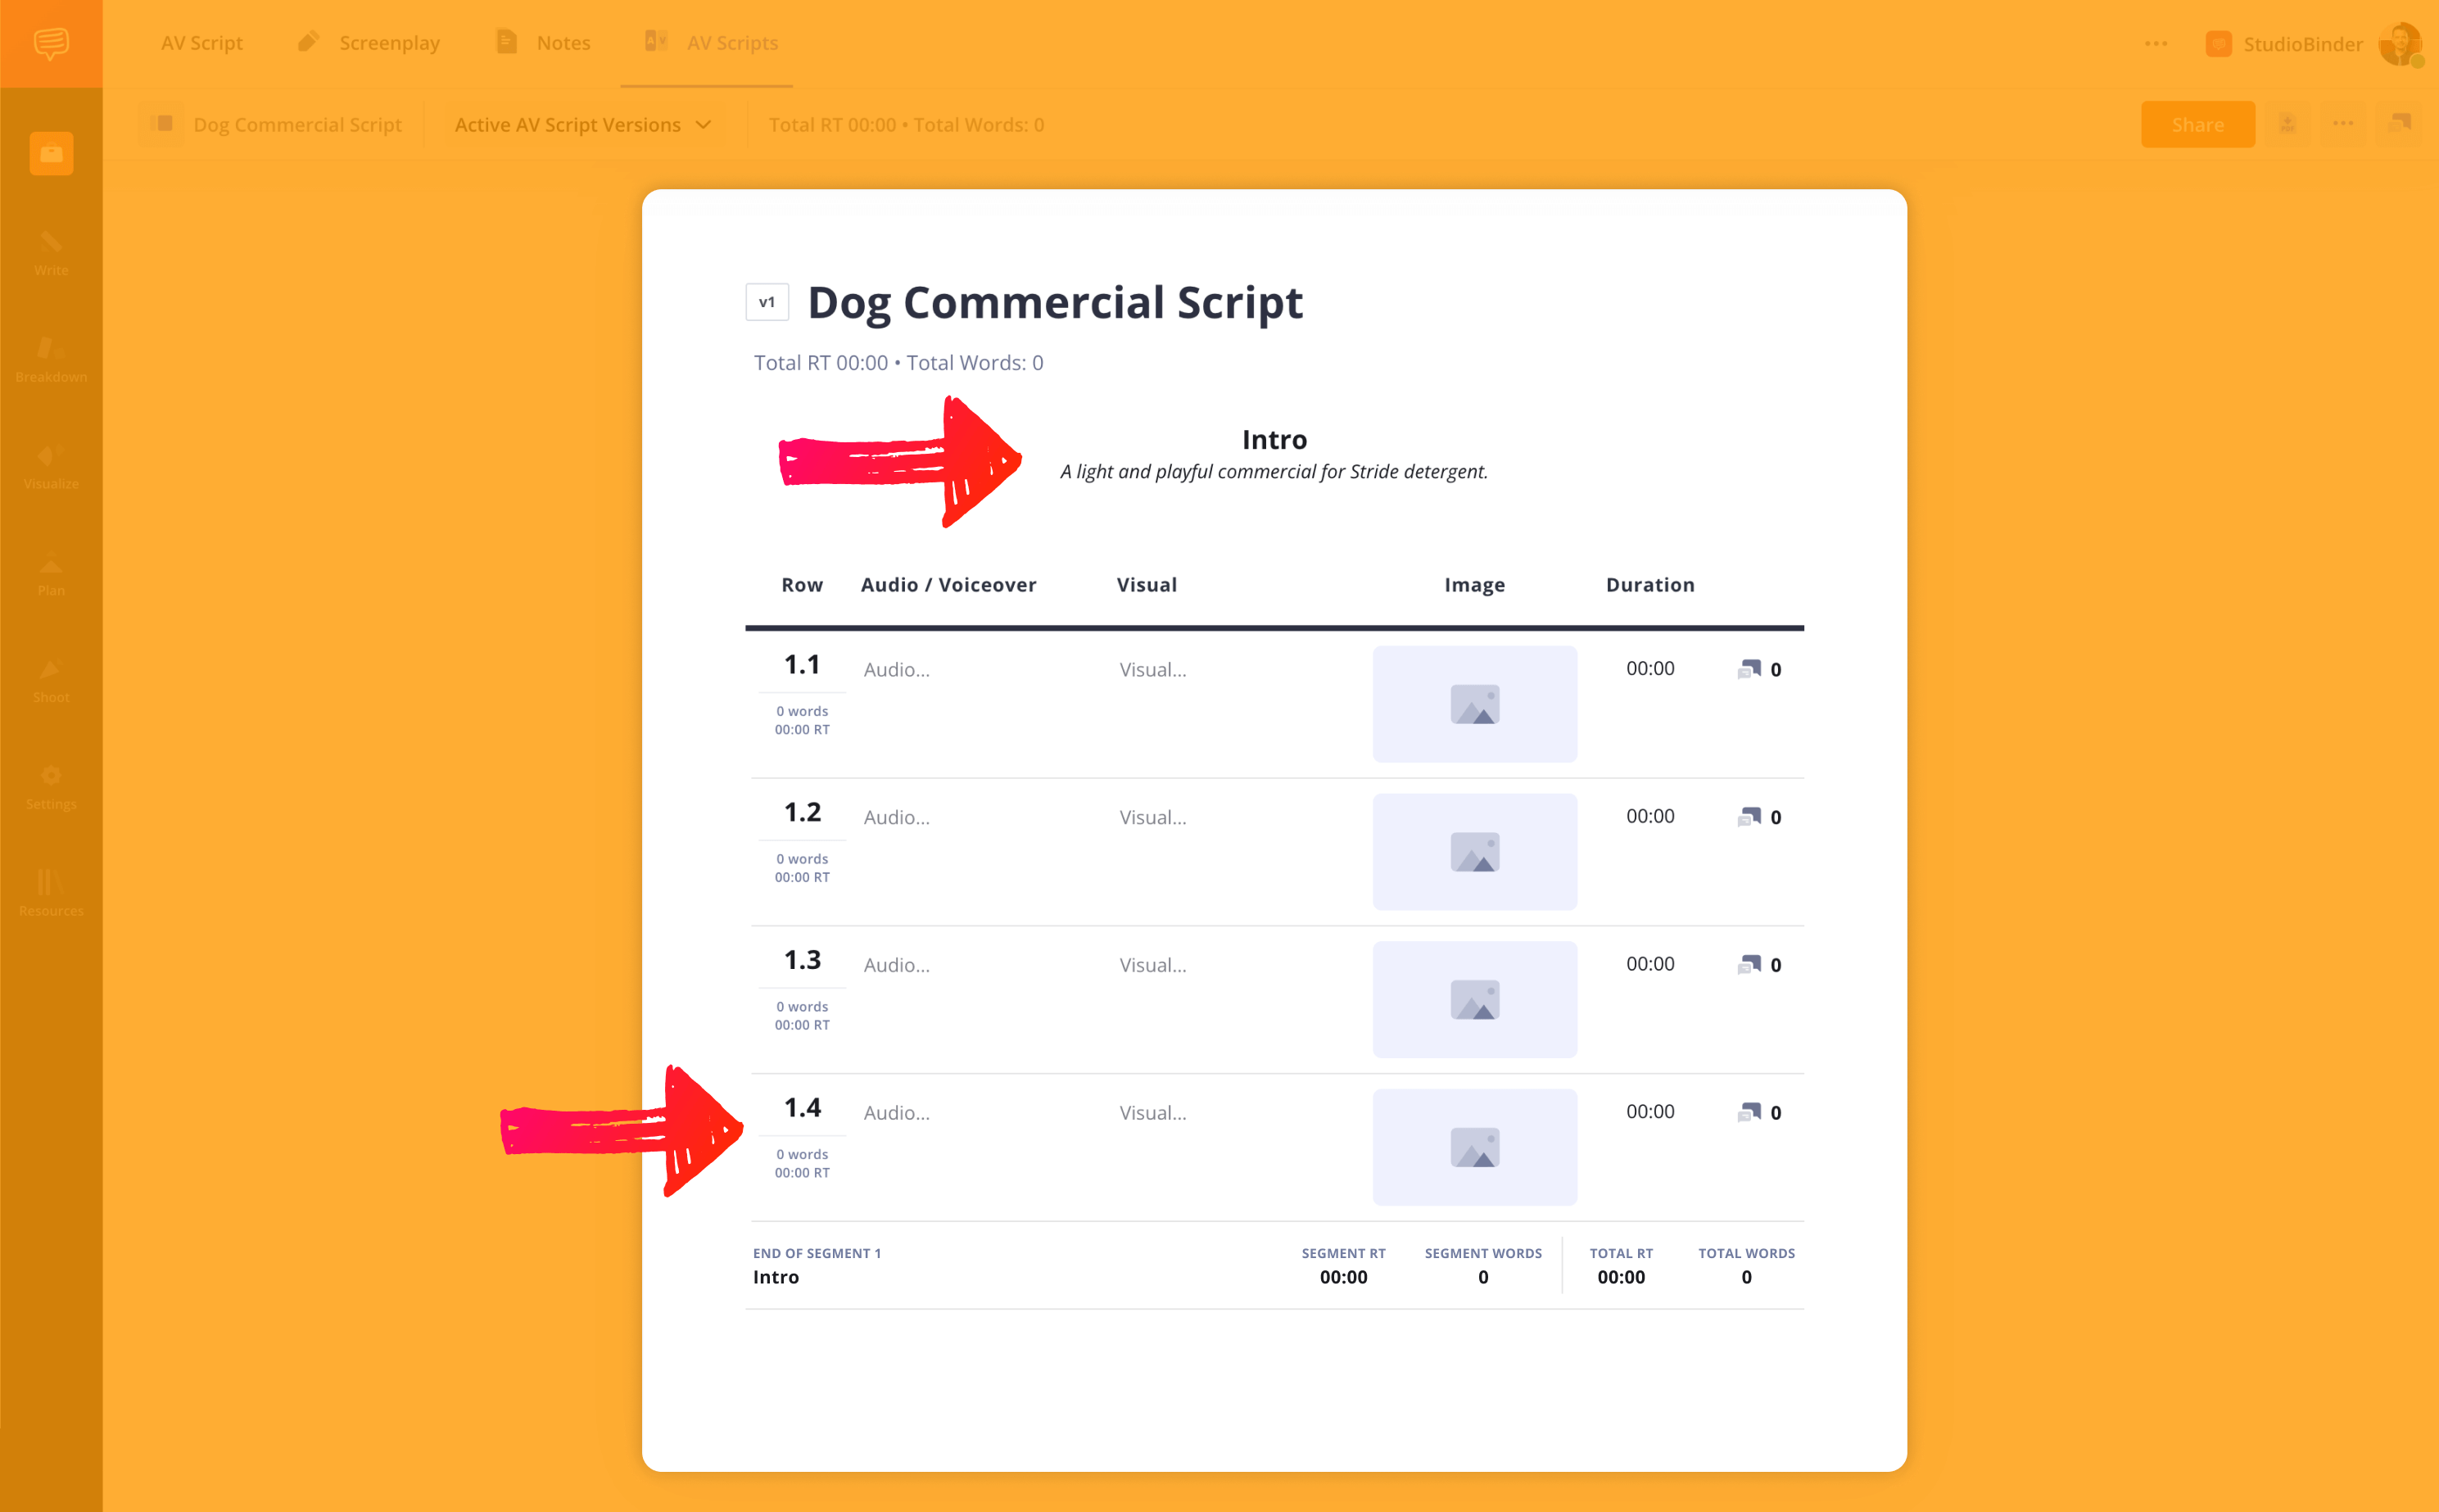 How to Write an AV Script Add segment titles and new rows